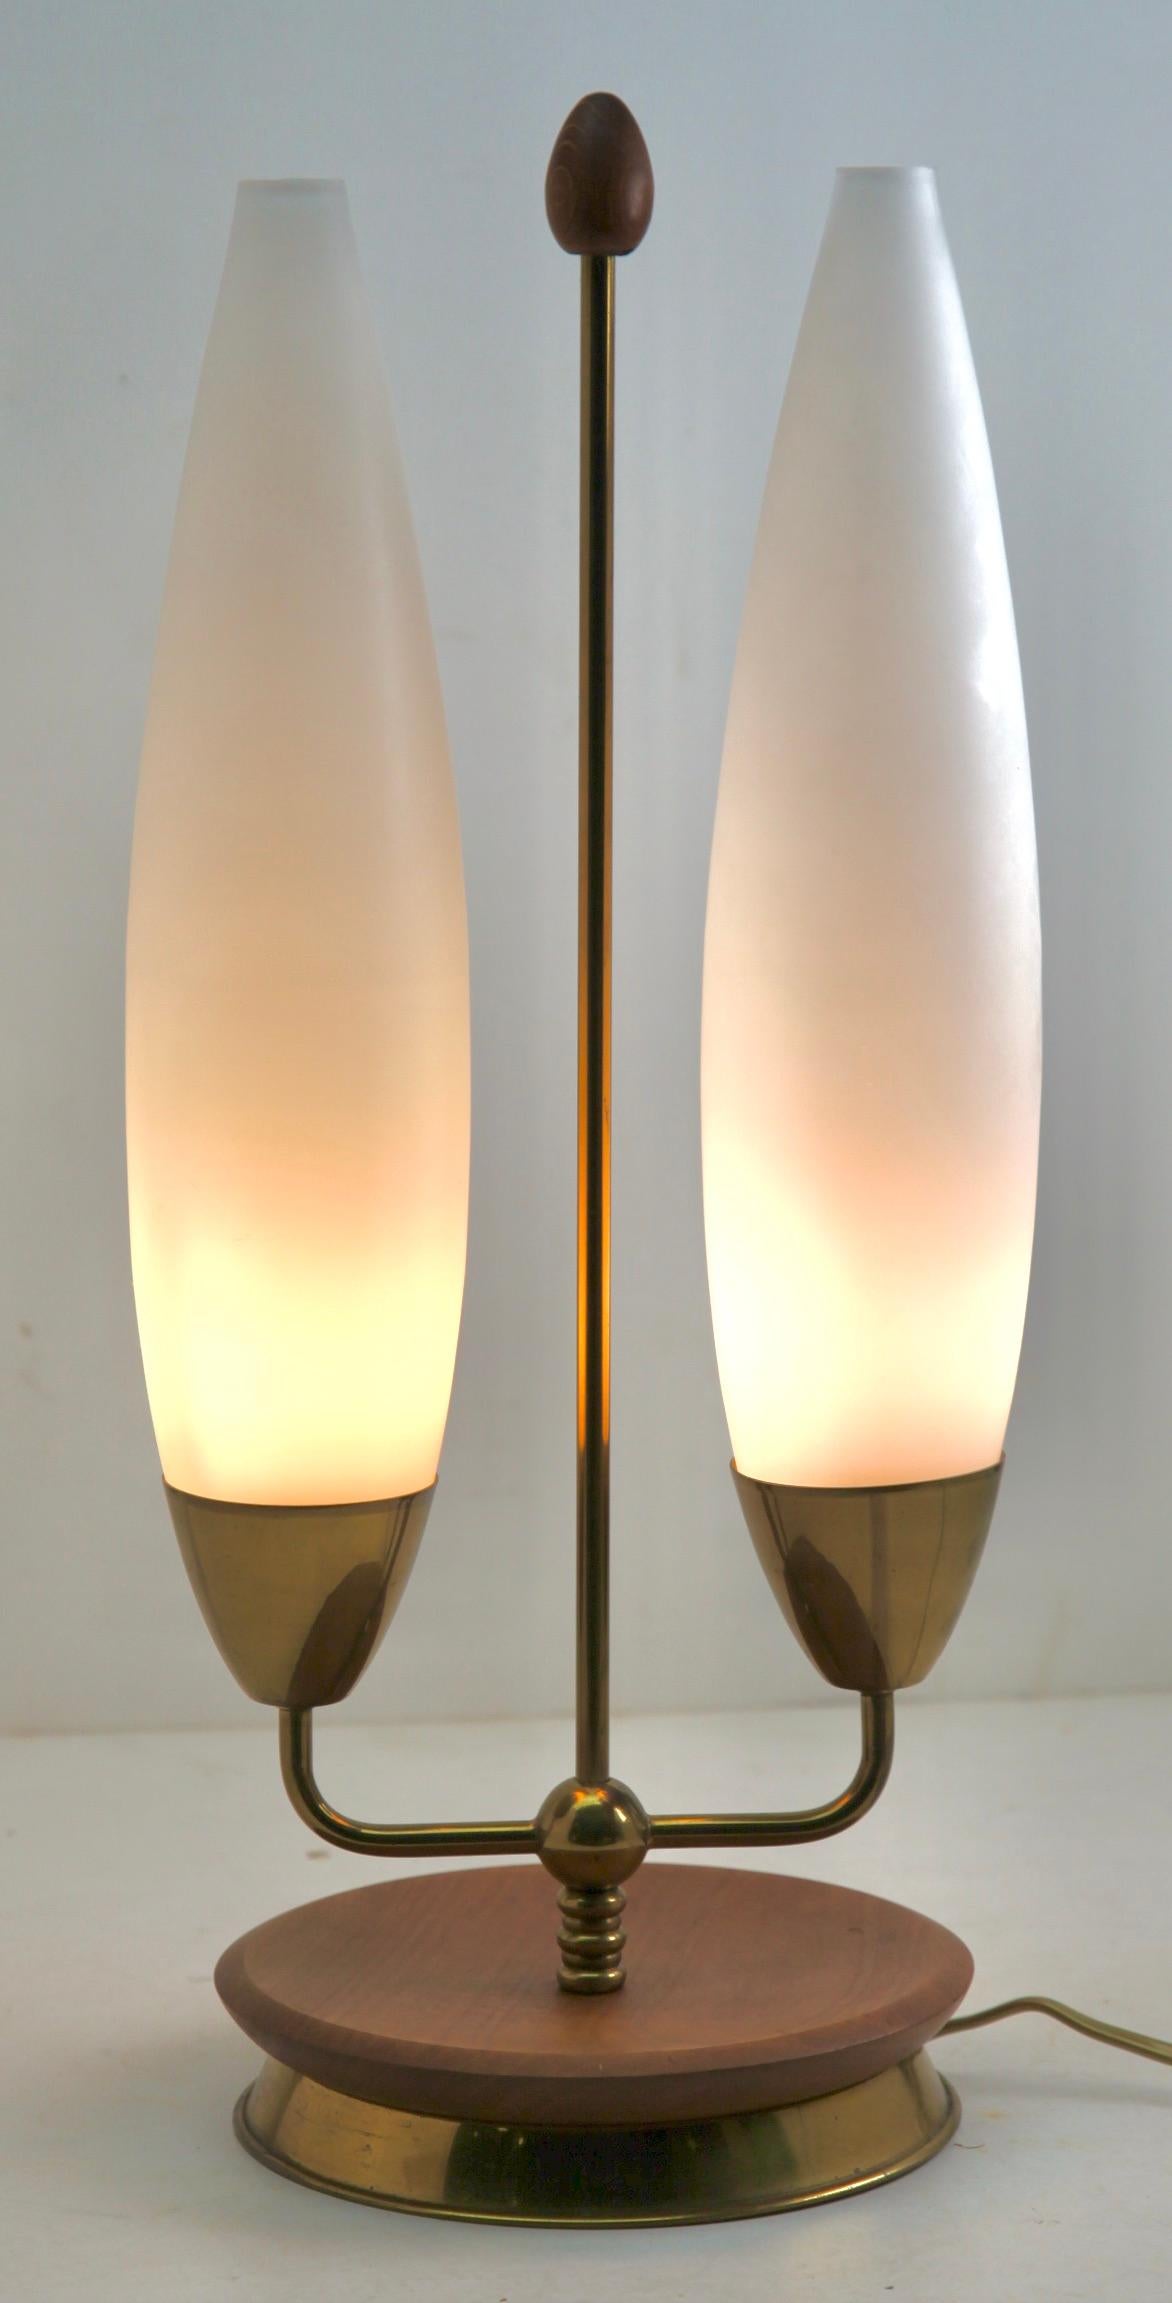 Hand-Crafted Vintage Table Lamp with Milk-White Glass Shades and Brass / Fruitwood Base